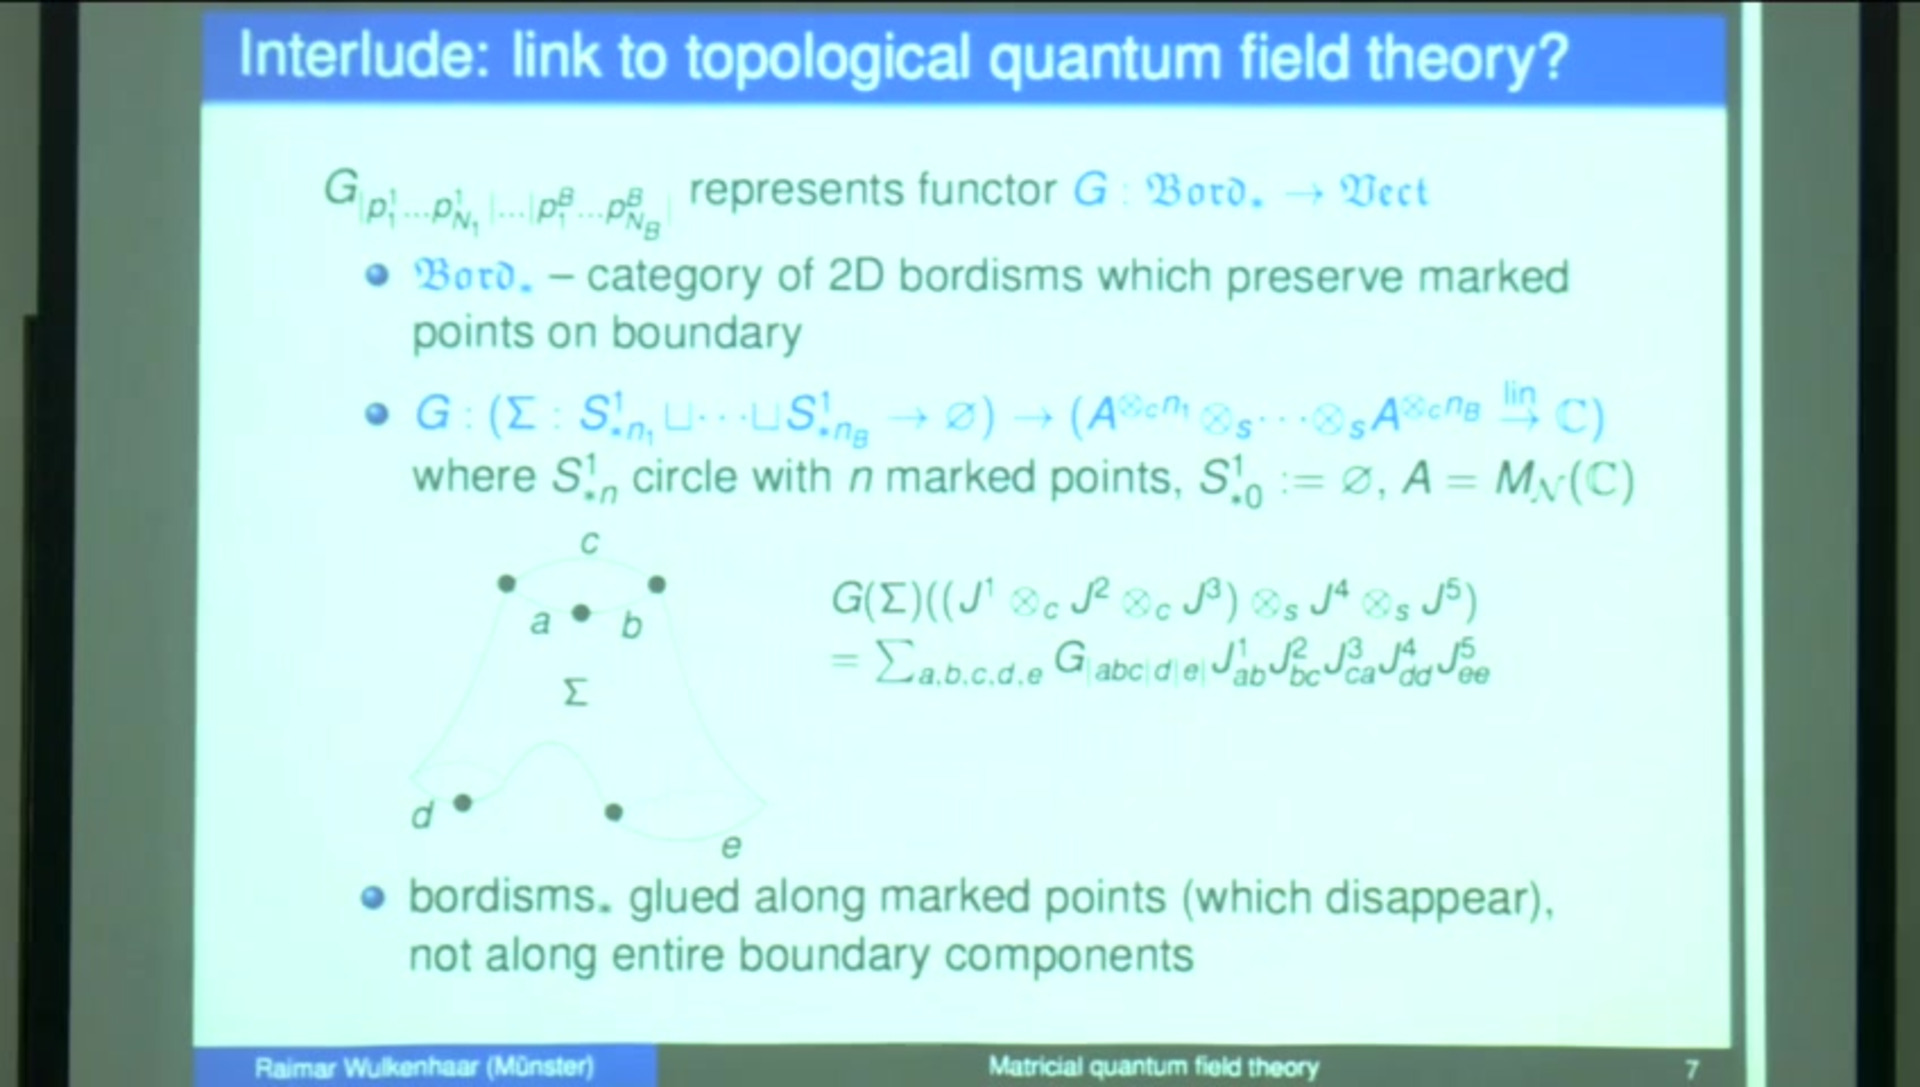 A 2D-Topological Quantum Field Theory.